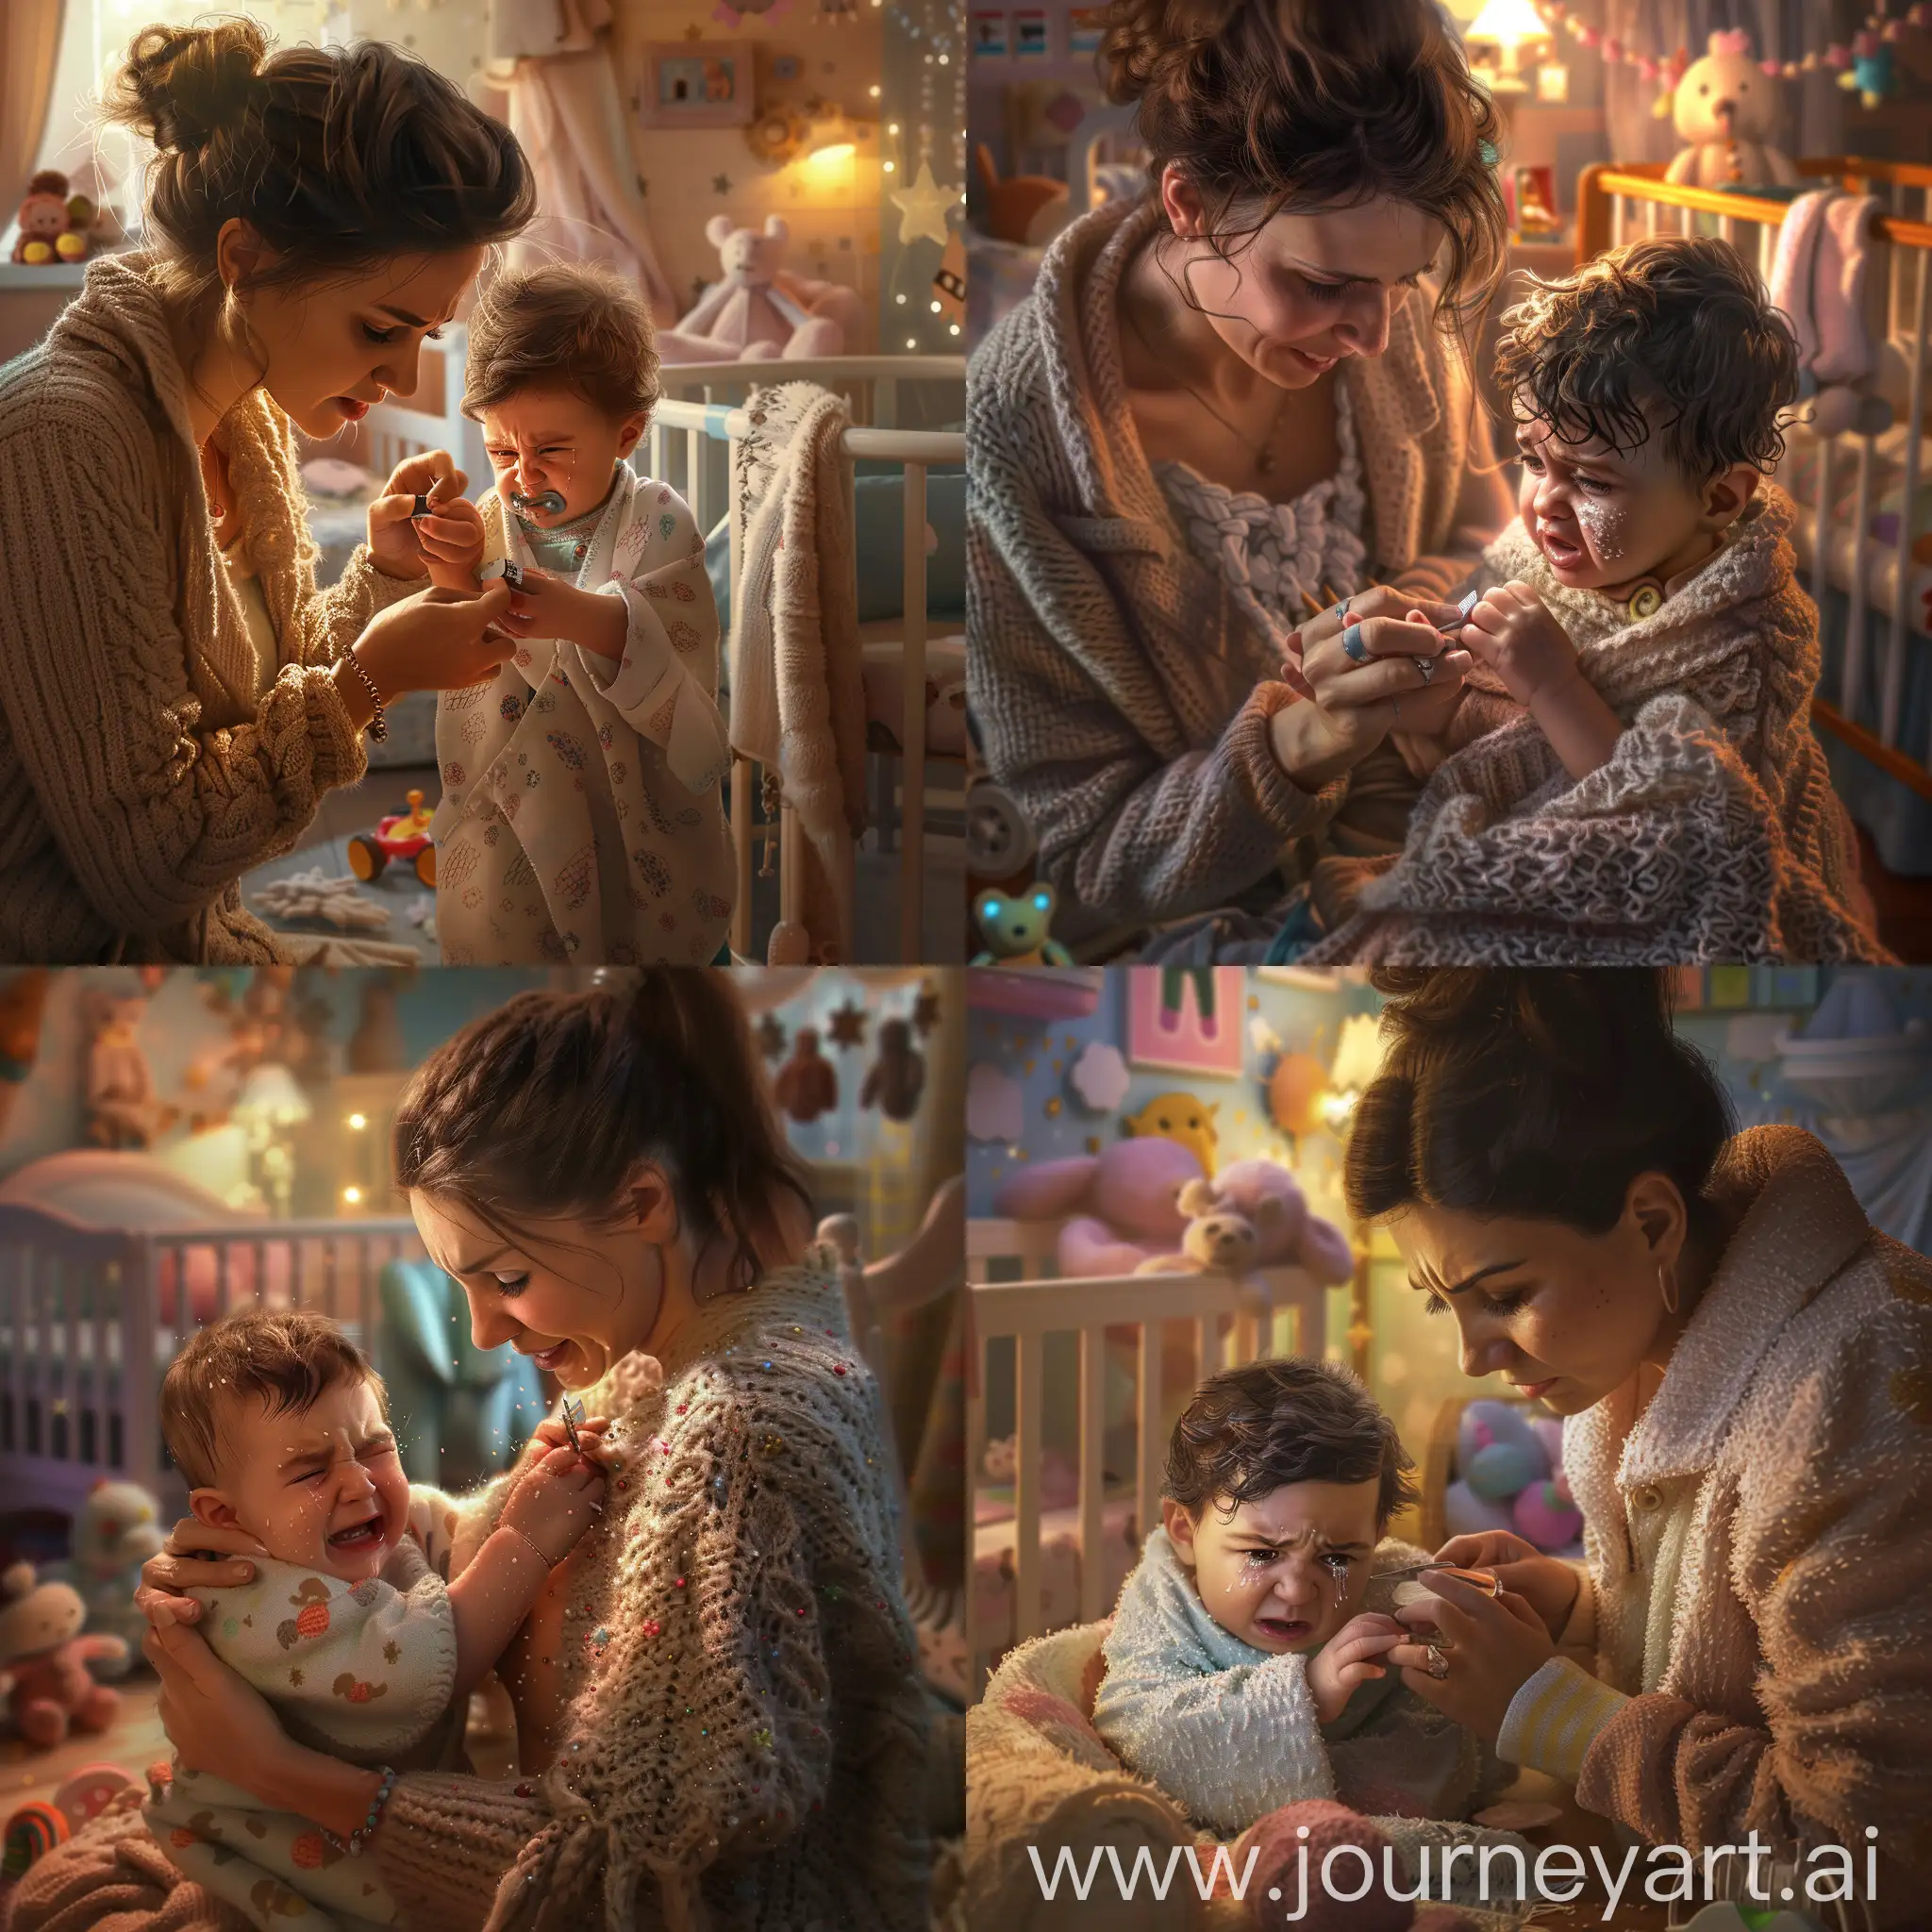 Create a hyper-realistic image depicting a mother tenderly clipping her baby's nails. The scene takes place in a warmly lit, cozy nursery room. The mother, dressed in soft, casual clothes, is focused and gentle, holding the baby's tiny hand with utmost care. The baby, wrapped in a soft, pastel-colored blanket, has tears streaming down its cheeks, its face scrunched up in discomfort, expressing a sense of unease and the unfamiliar sensation of getting its nails trimmed. The background is filled with soft, comforting nursery decor, including a crib with plush toys and a gentle night light casting a soothing glow. The emotion in the room is a mix of love, care, and the baby's temporary distress, capturing a very intimate and relatable parenting moment.